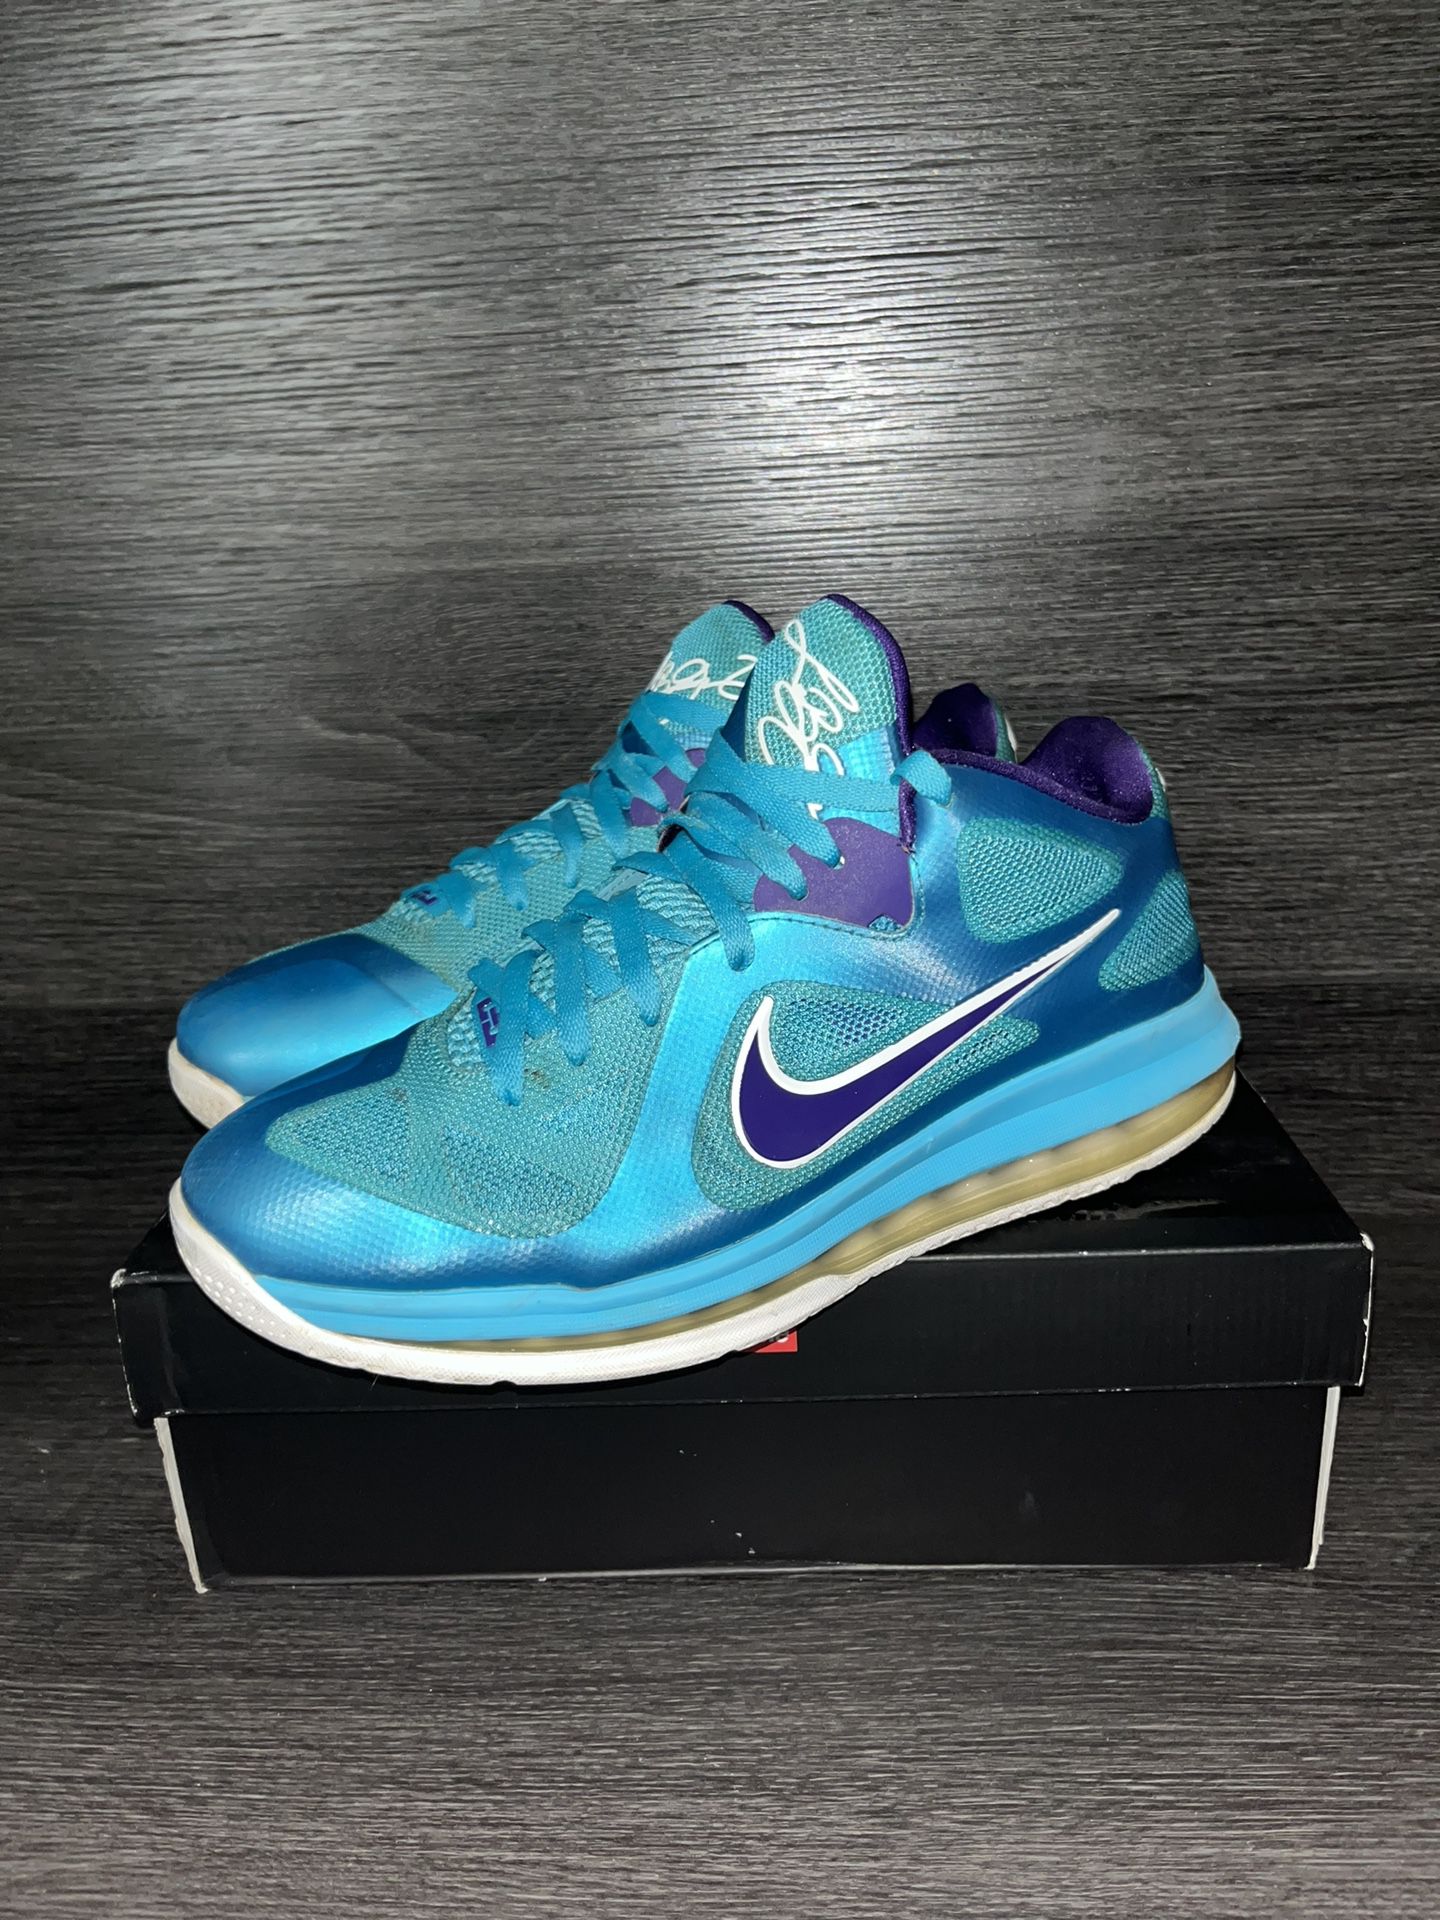 Lebron 9 Hornets - Great Condition- RARE SNEAKER SHOE